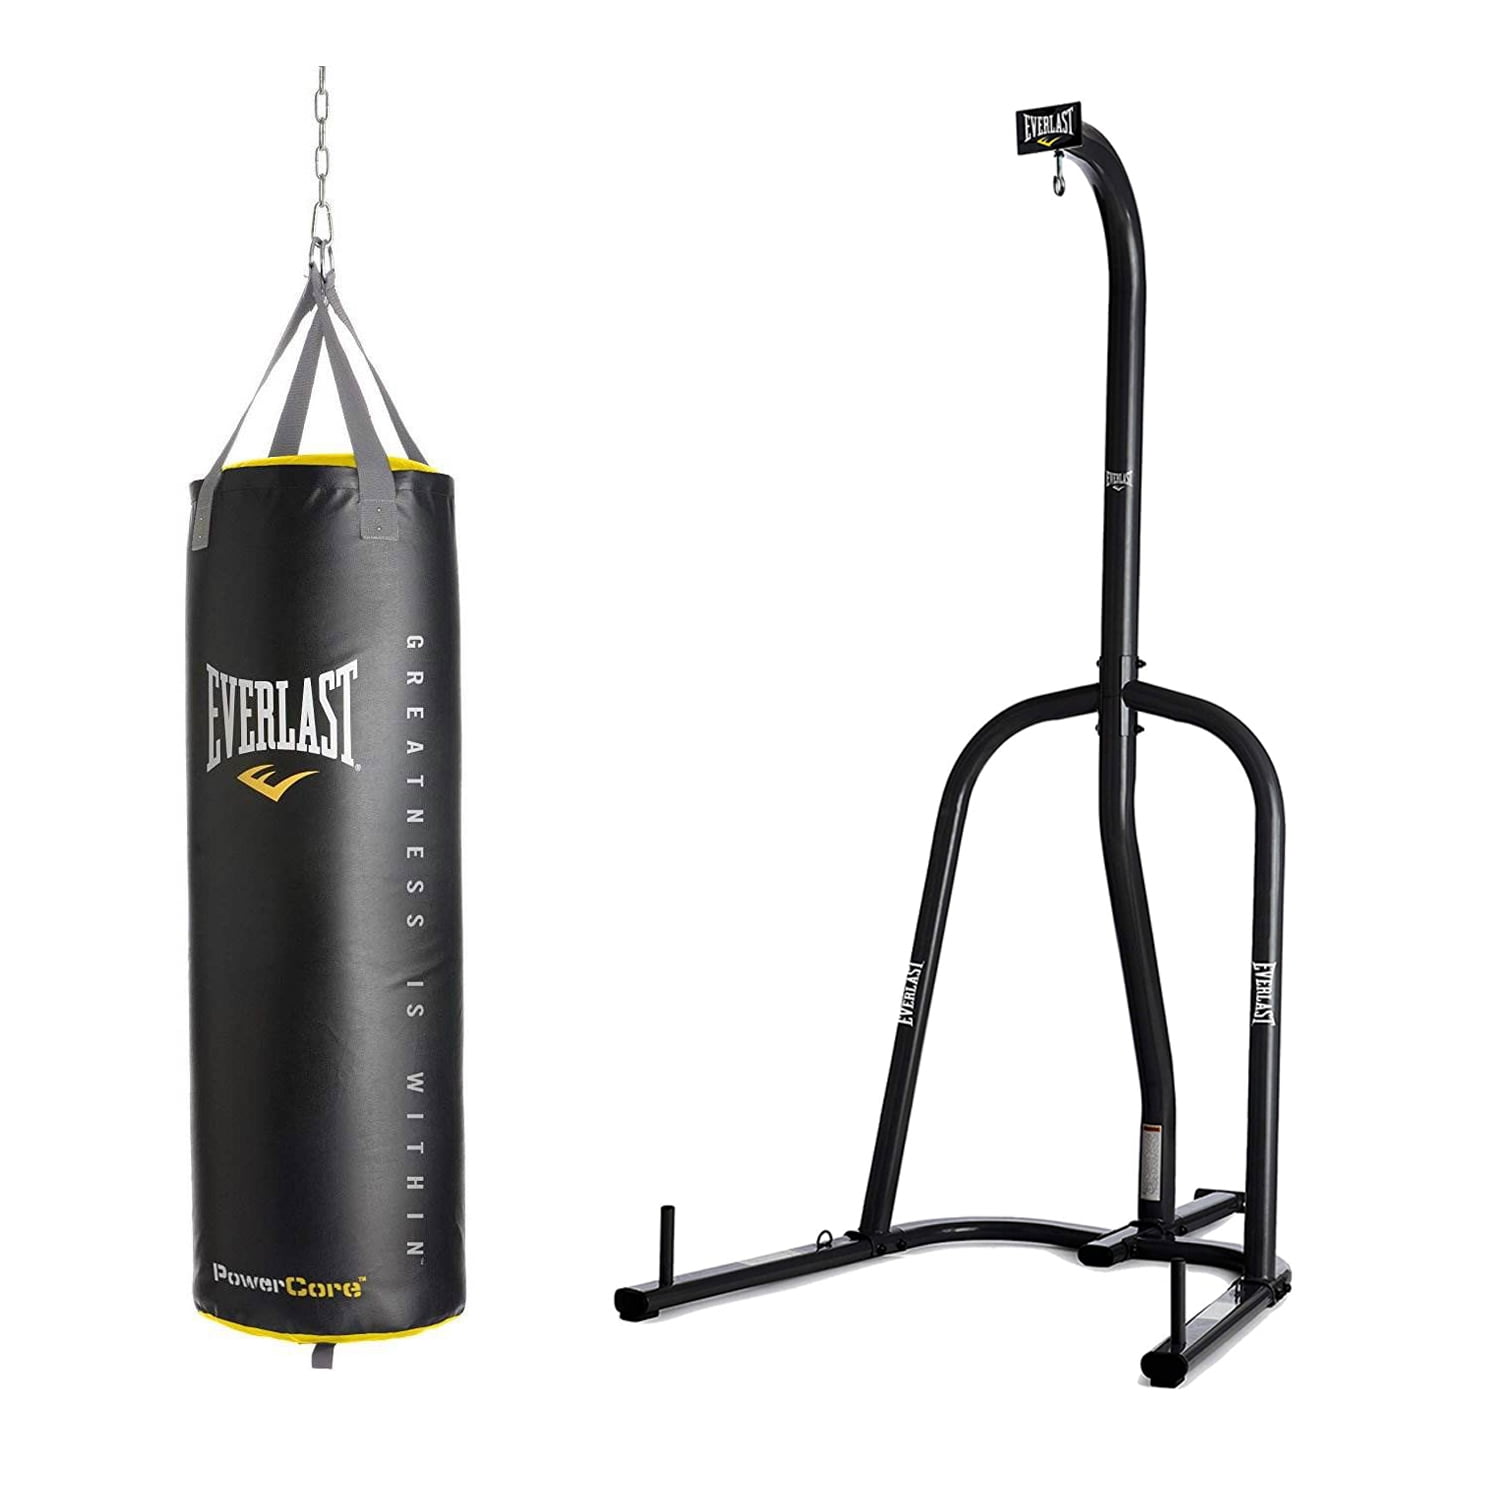 Everlast Single Station Heavy Bag with a 70lbs Heavy Bag Kit FAST SHIPPING 